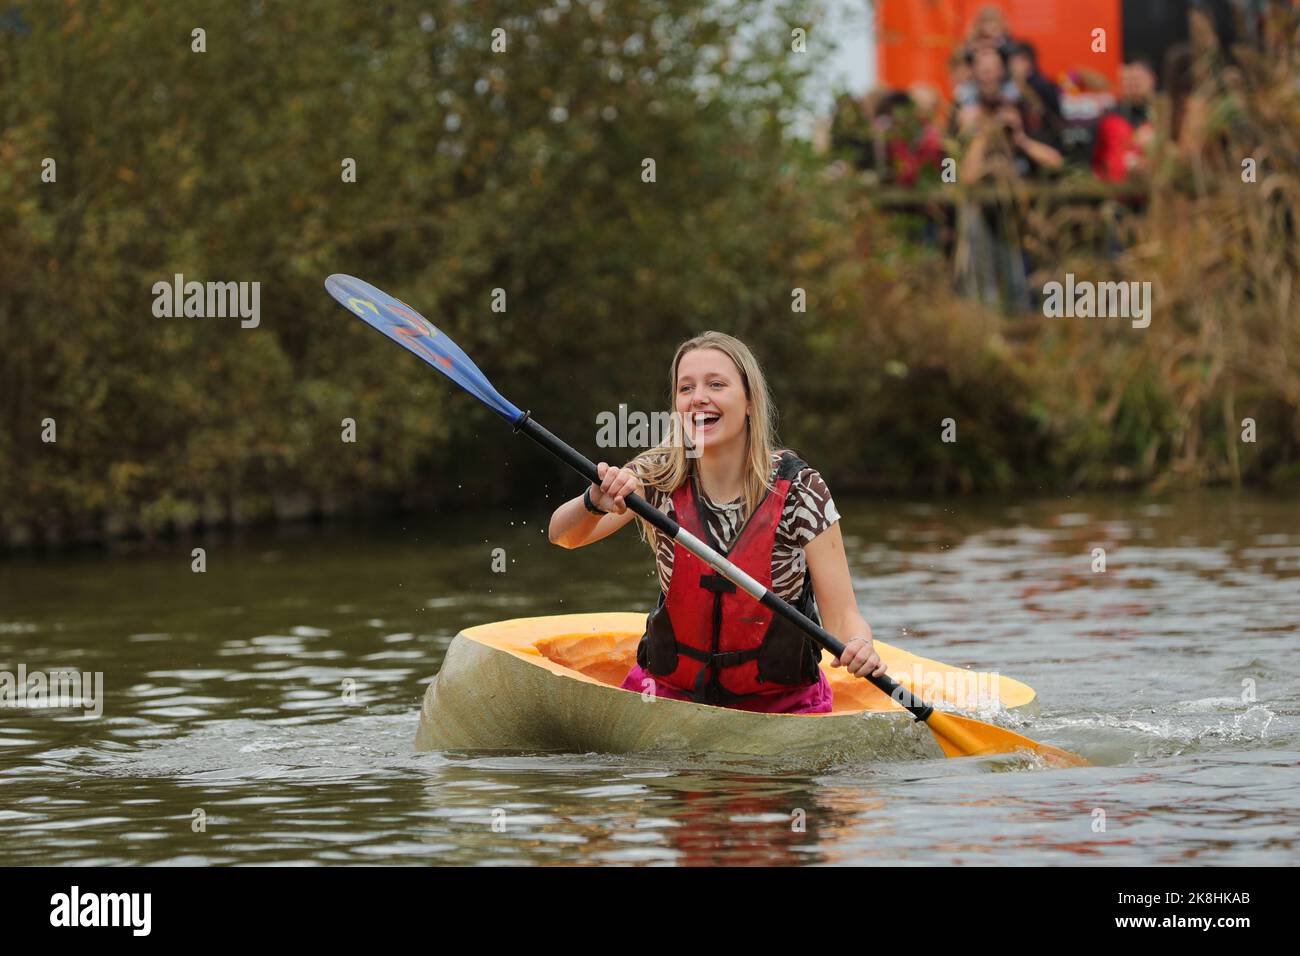 Kasterlee, Belgium. 23rd Oct, 2022. A woman competes in the pumpkin regatta in the village of Lichtaart of Kasterlee, Belgium, Oct. 23, 2022. The 13th edition of pumpkin regatta is a kayaking competition in Belgium, attracting participants to sit and compete in large hollow-out pumpkins. According to local organizers, the weight of each pumpkin that was made into a boat could reach hundreds of kilograms. Credit: Zheng Huansong/Xinhua/Alamy Live News Stock Photo